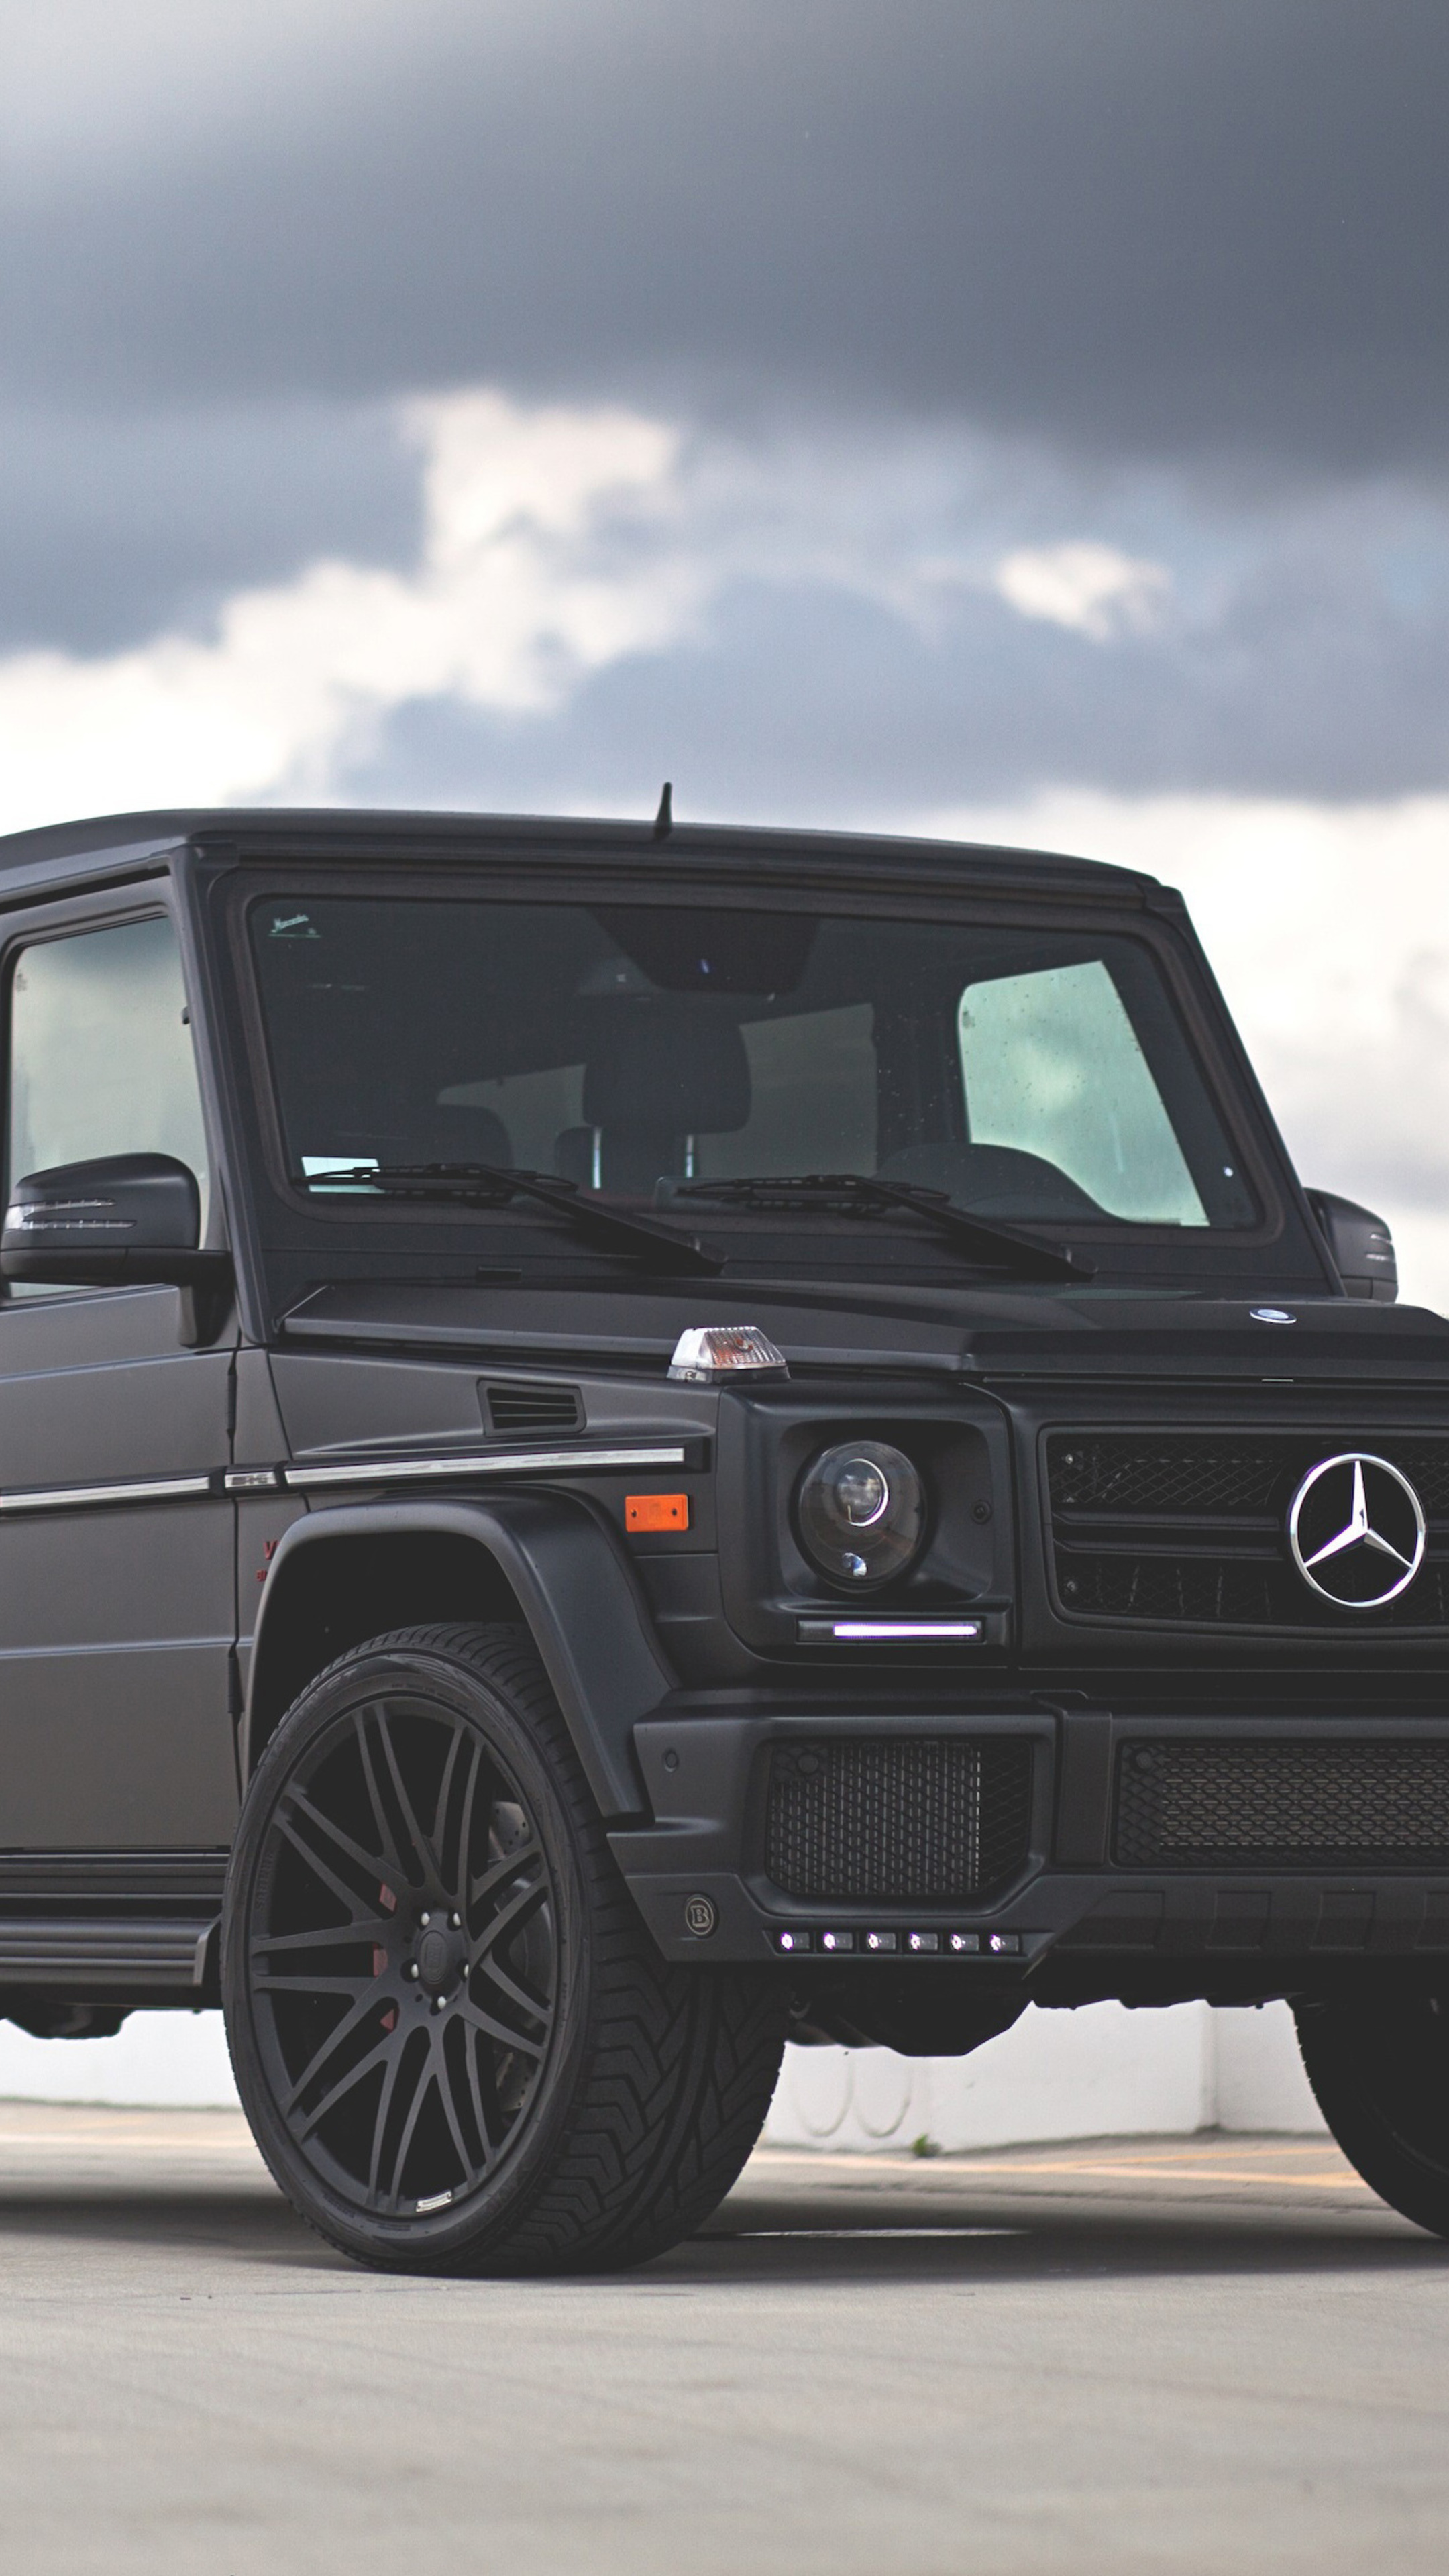 G Wagon And Smoke IPhone Wallpaper HD IPhone Wallpapers Wallpaper Download   MOONAZ